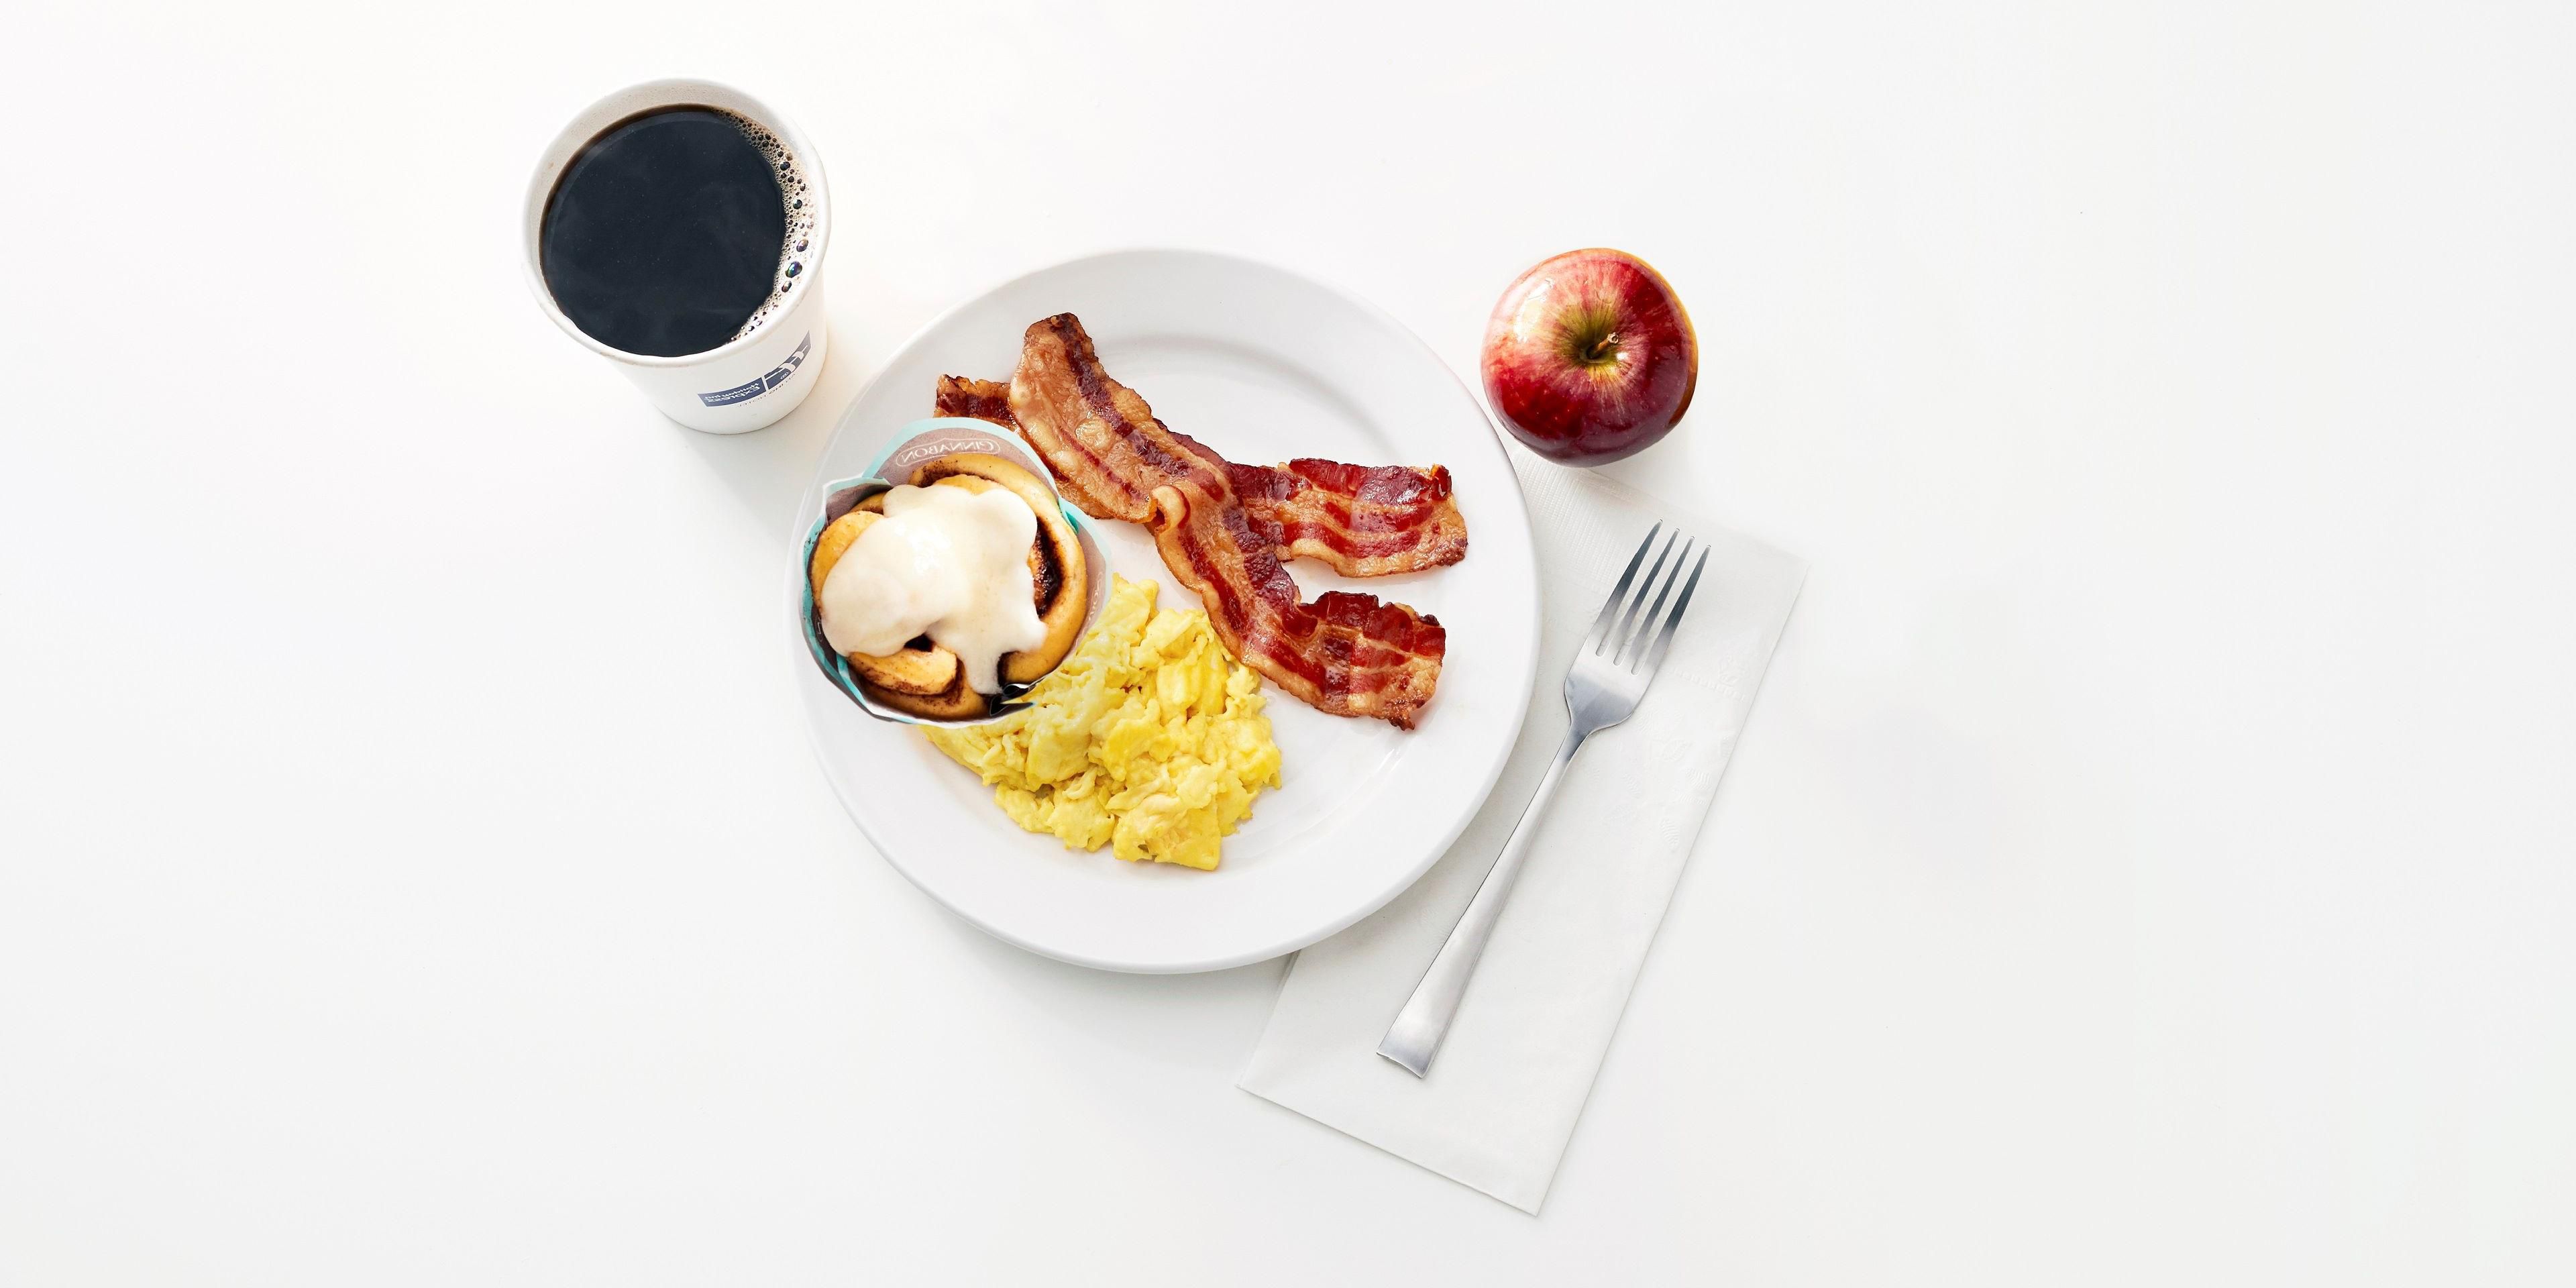 Kick start your day with our Express Start Breakfast, with grab ‘n’ go options and favorites such as eggs and bacon, hot pancakes, our signature cinnamon rolls and fresh coffee. Offered from 6:30am - 9:30am Mon-Fri and 7am-10am Sat-Sun.